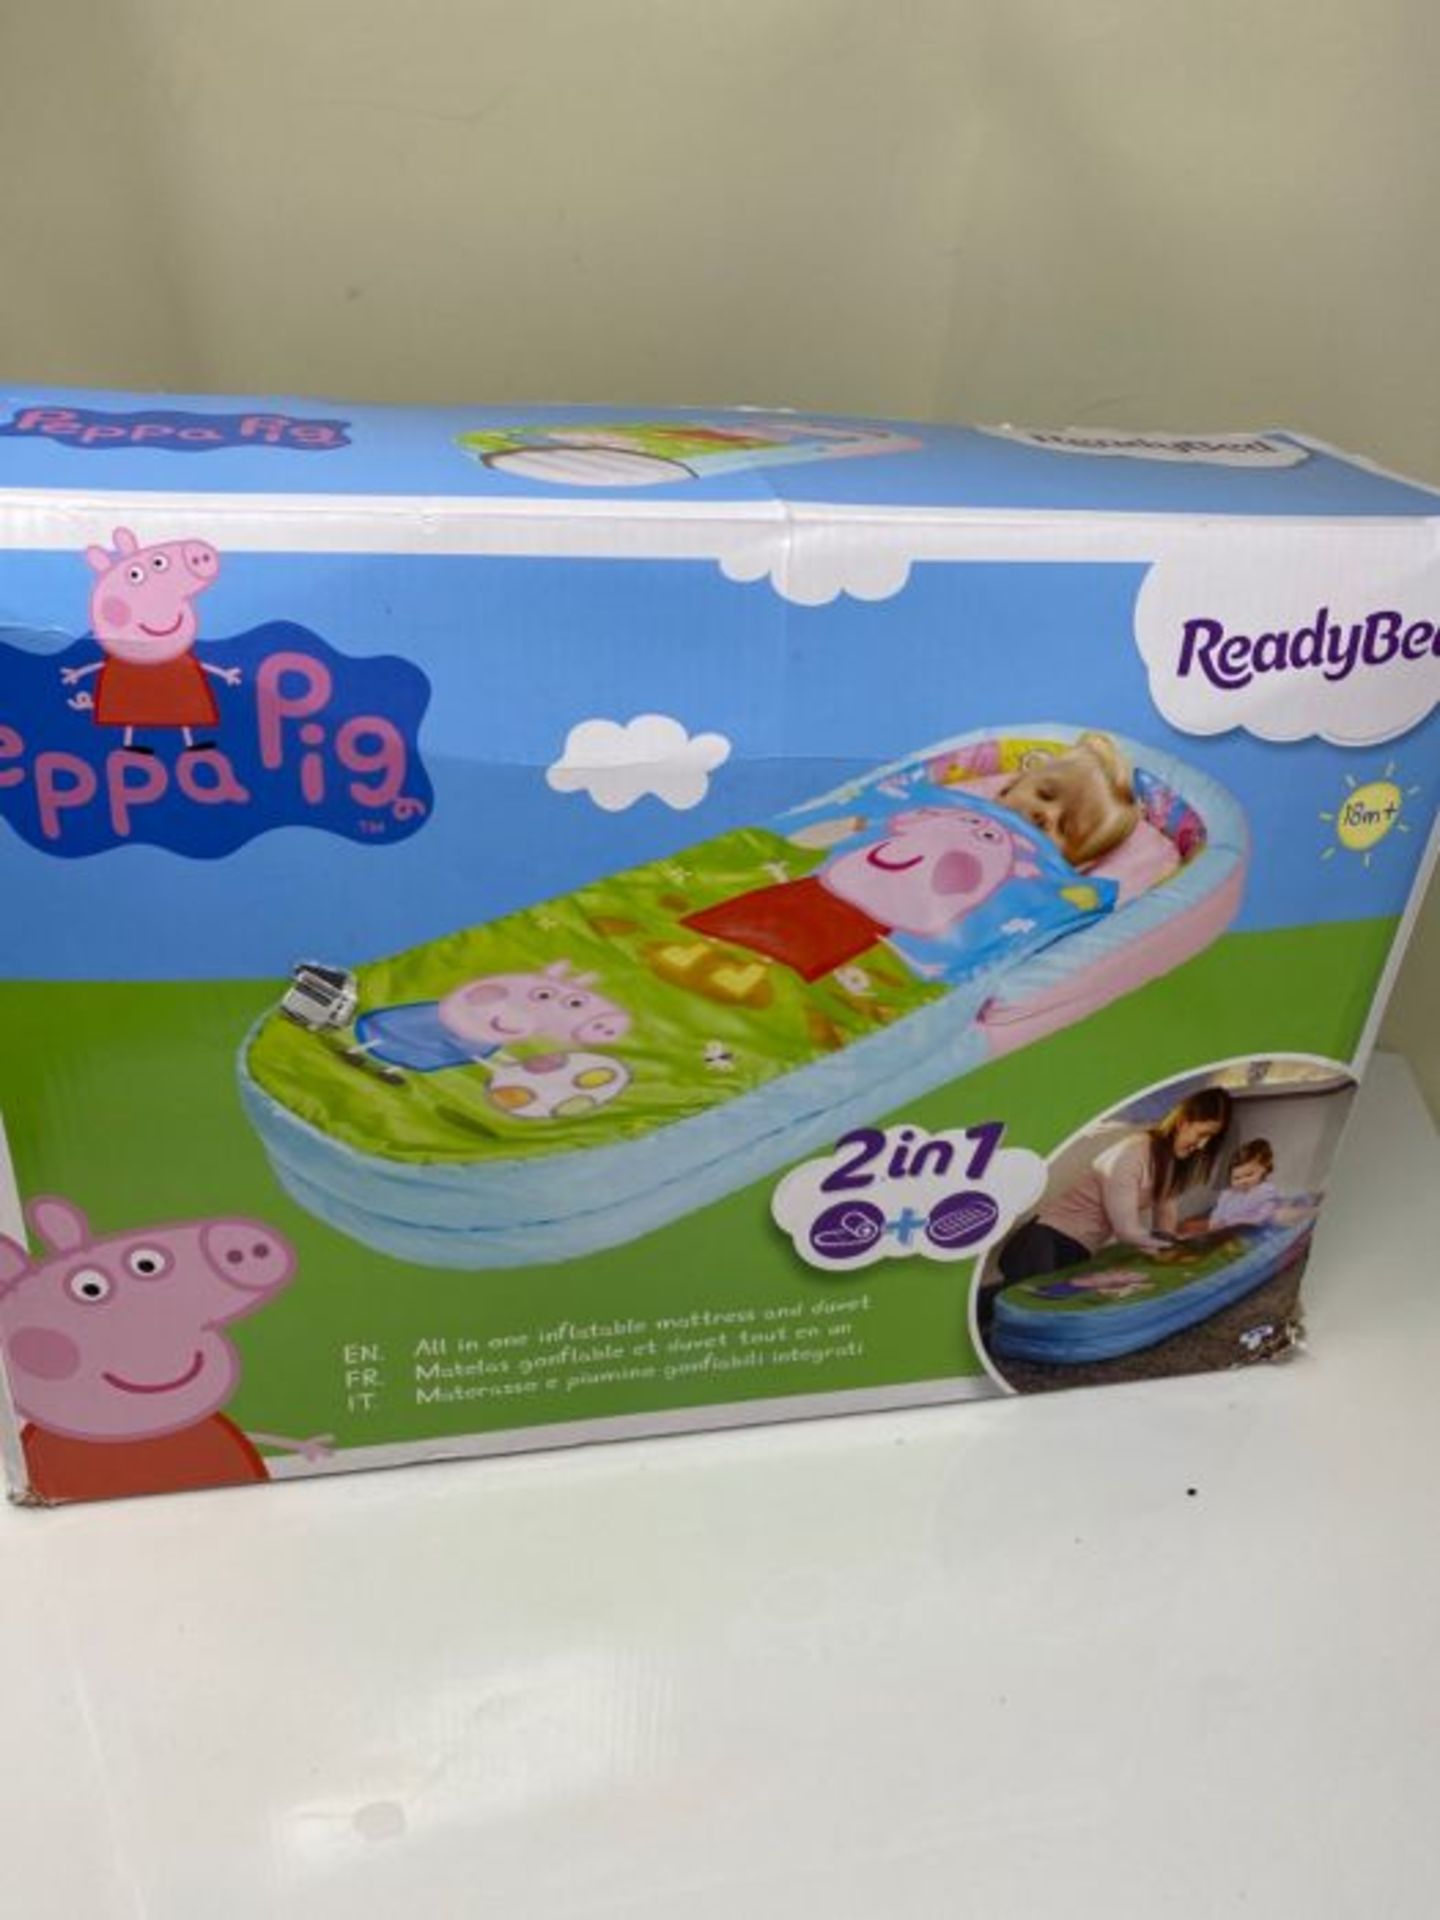 Readybed Peppa Pig My First Bed, Polyester-Cotton, Multi, 130 x 61 x 23 cm - Image 2 of 3